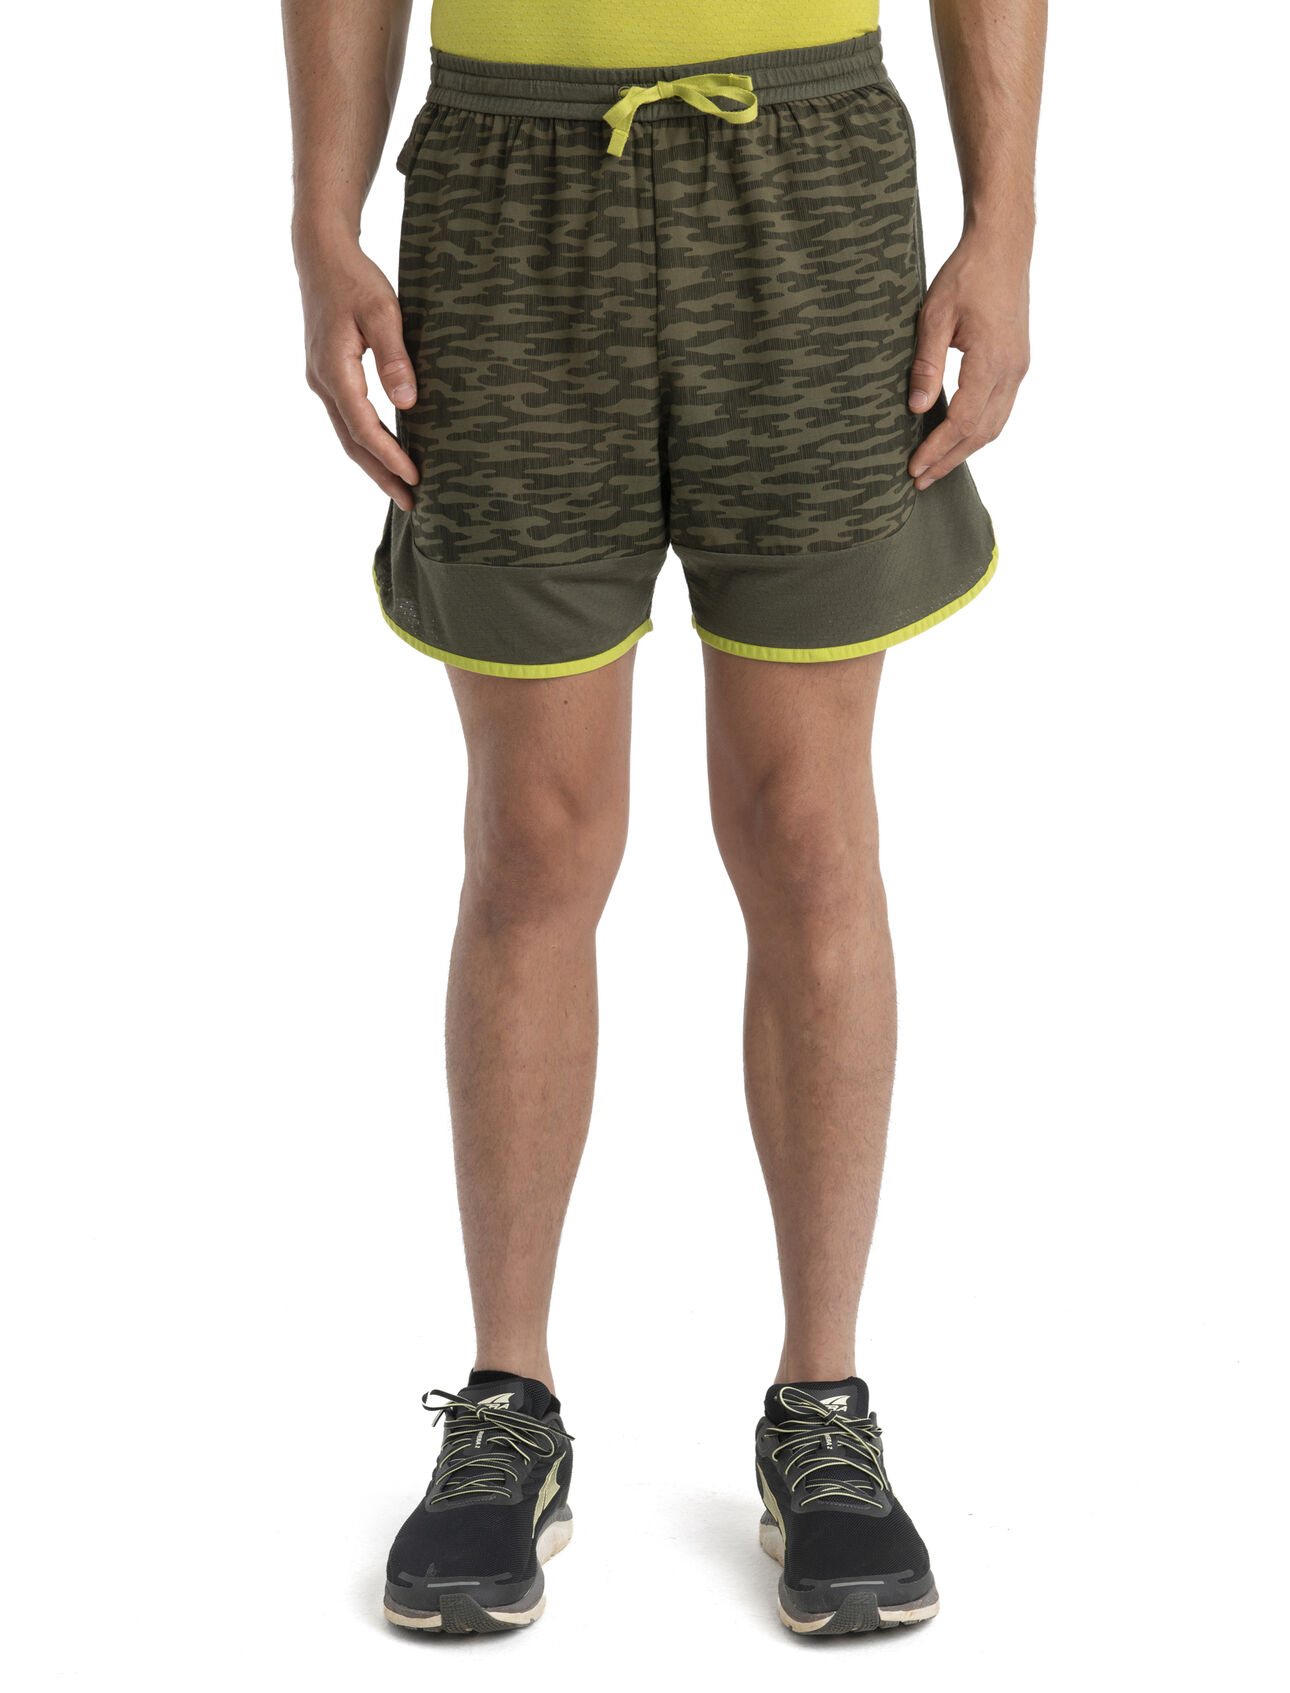 Mens 125 ZoneKnit™ Merino Shorts IB Topo Lightweight, highly breathable shorts designed for running, the 125 ZoneKnit™ Shorts IB Topo combine our Cool-Lite™ jersey fabric with body-mapped panels of Cool-Lite eyelet mesh for enhanced temperature regulation. The natural camo print adds a high-performance feel. 